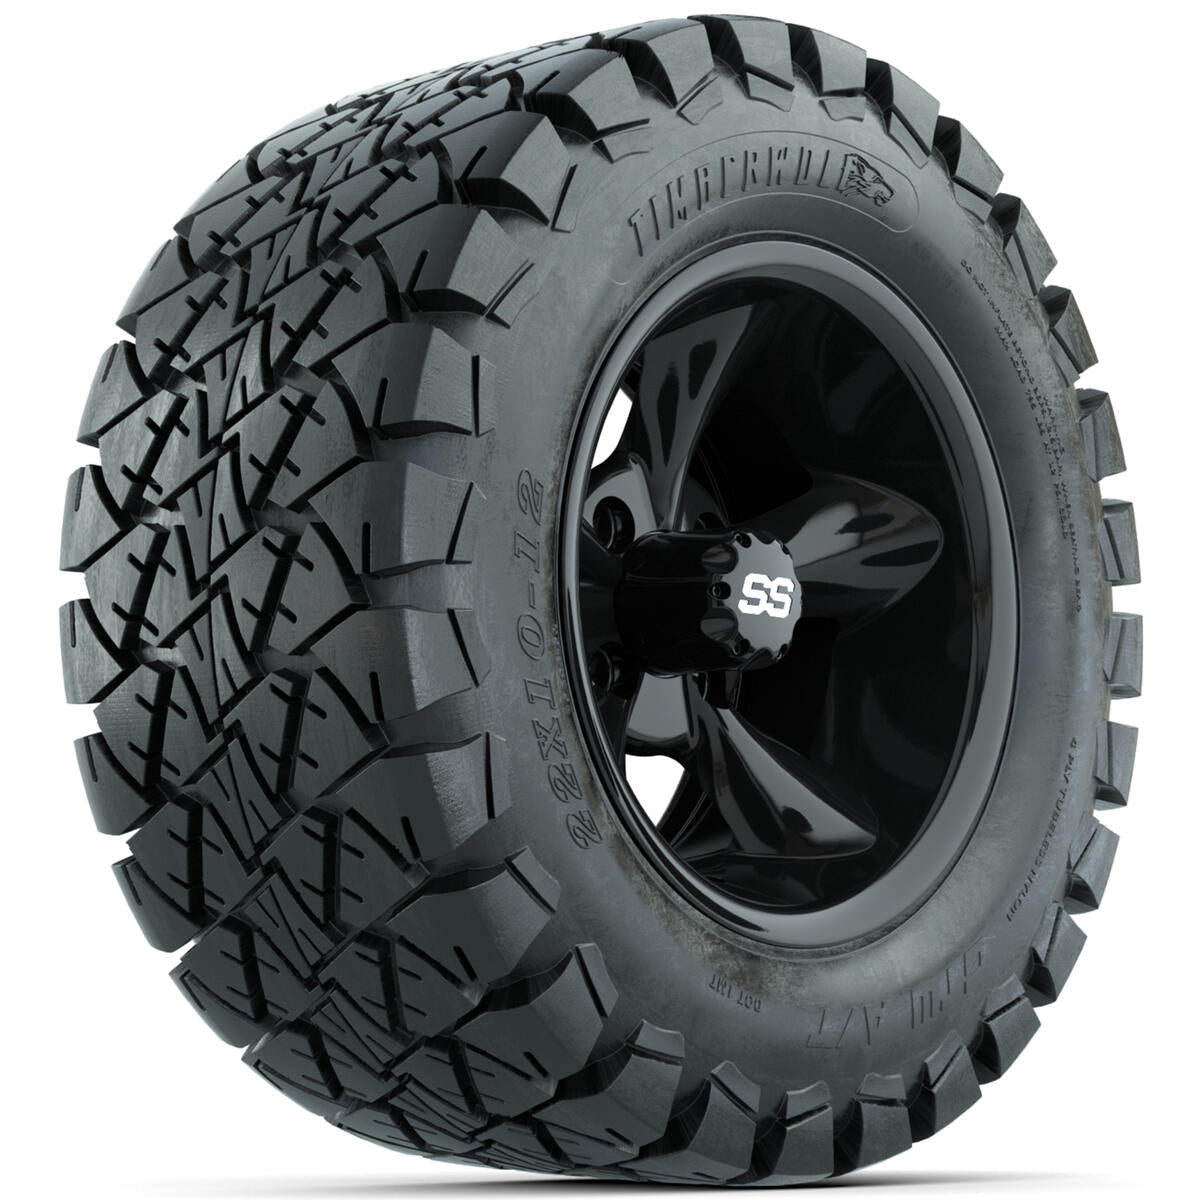 Set of 4 12"in GTW Godfather Wheels with 22x10-12"GTW Timberwolf All-Terrain Tires A19-736